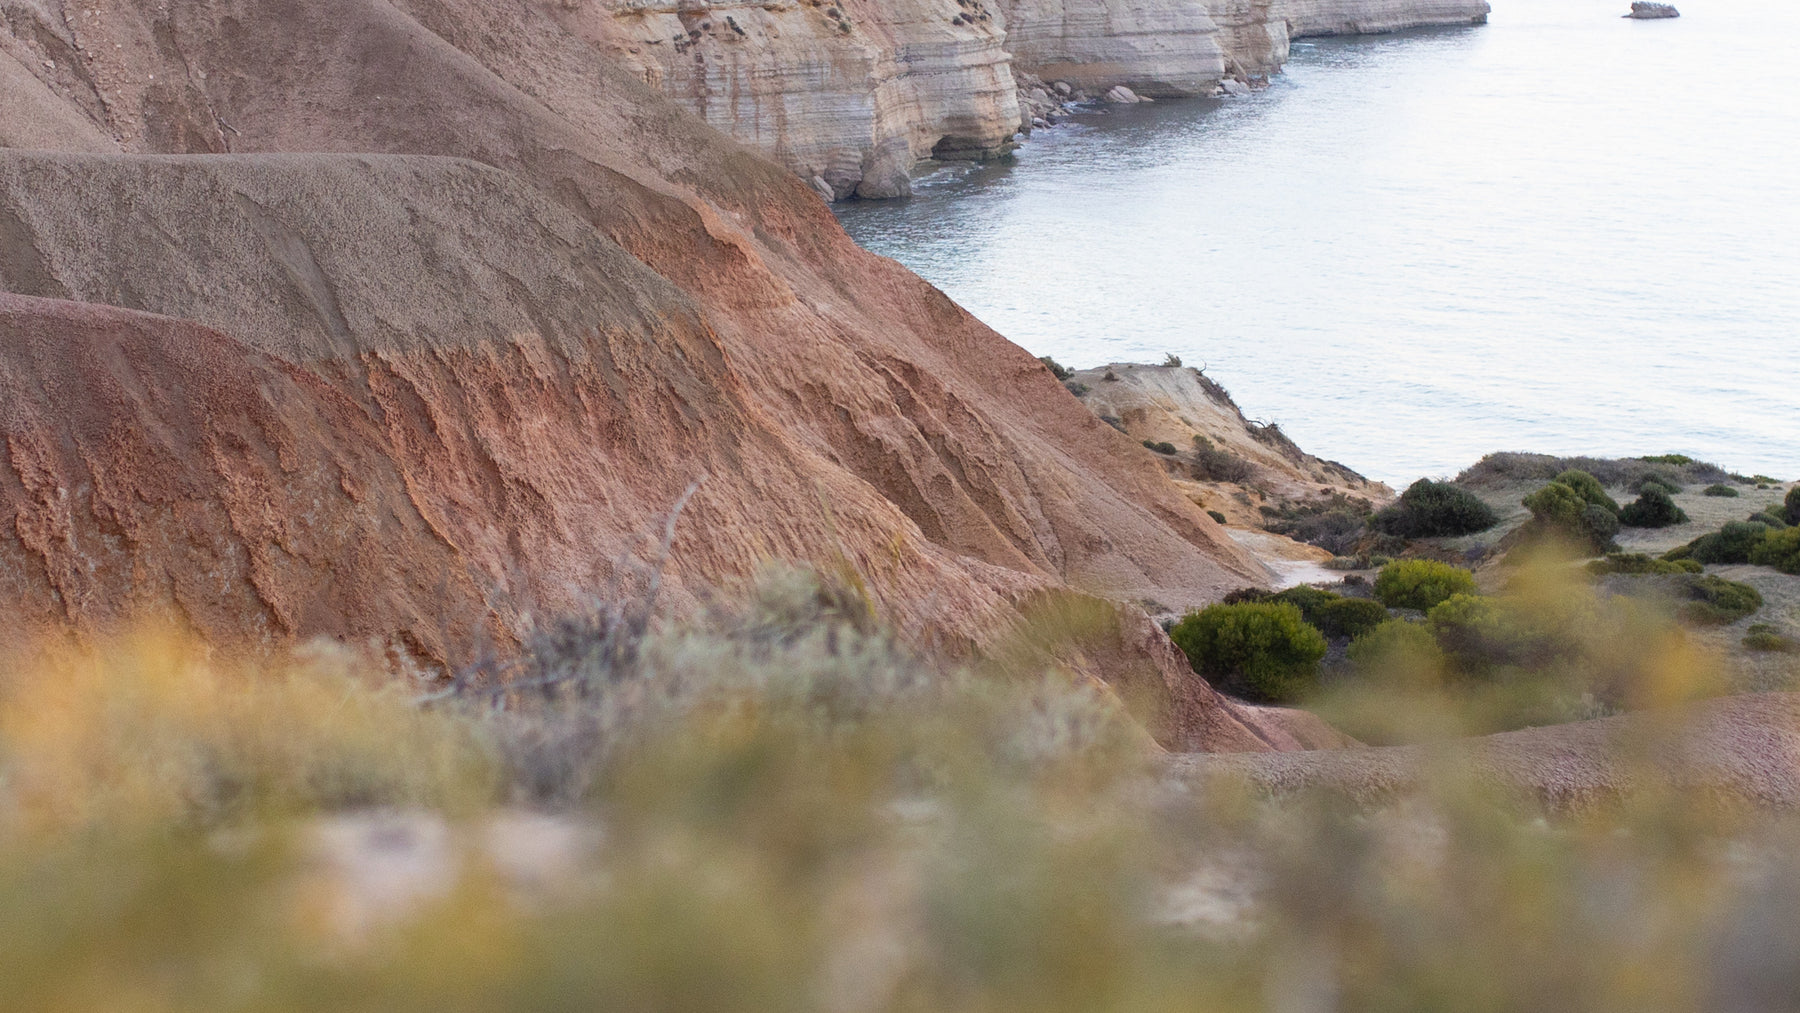 Coastal location with ochre earth cliffs and the sea in the distance